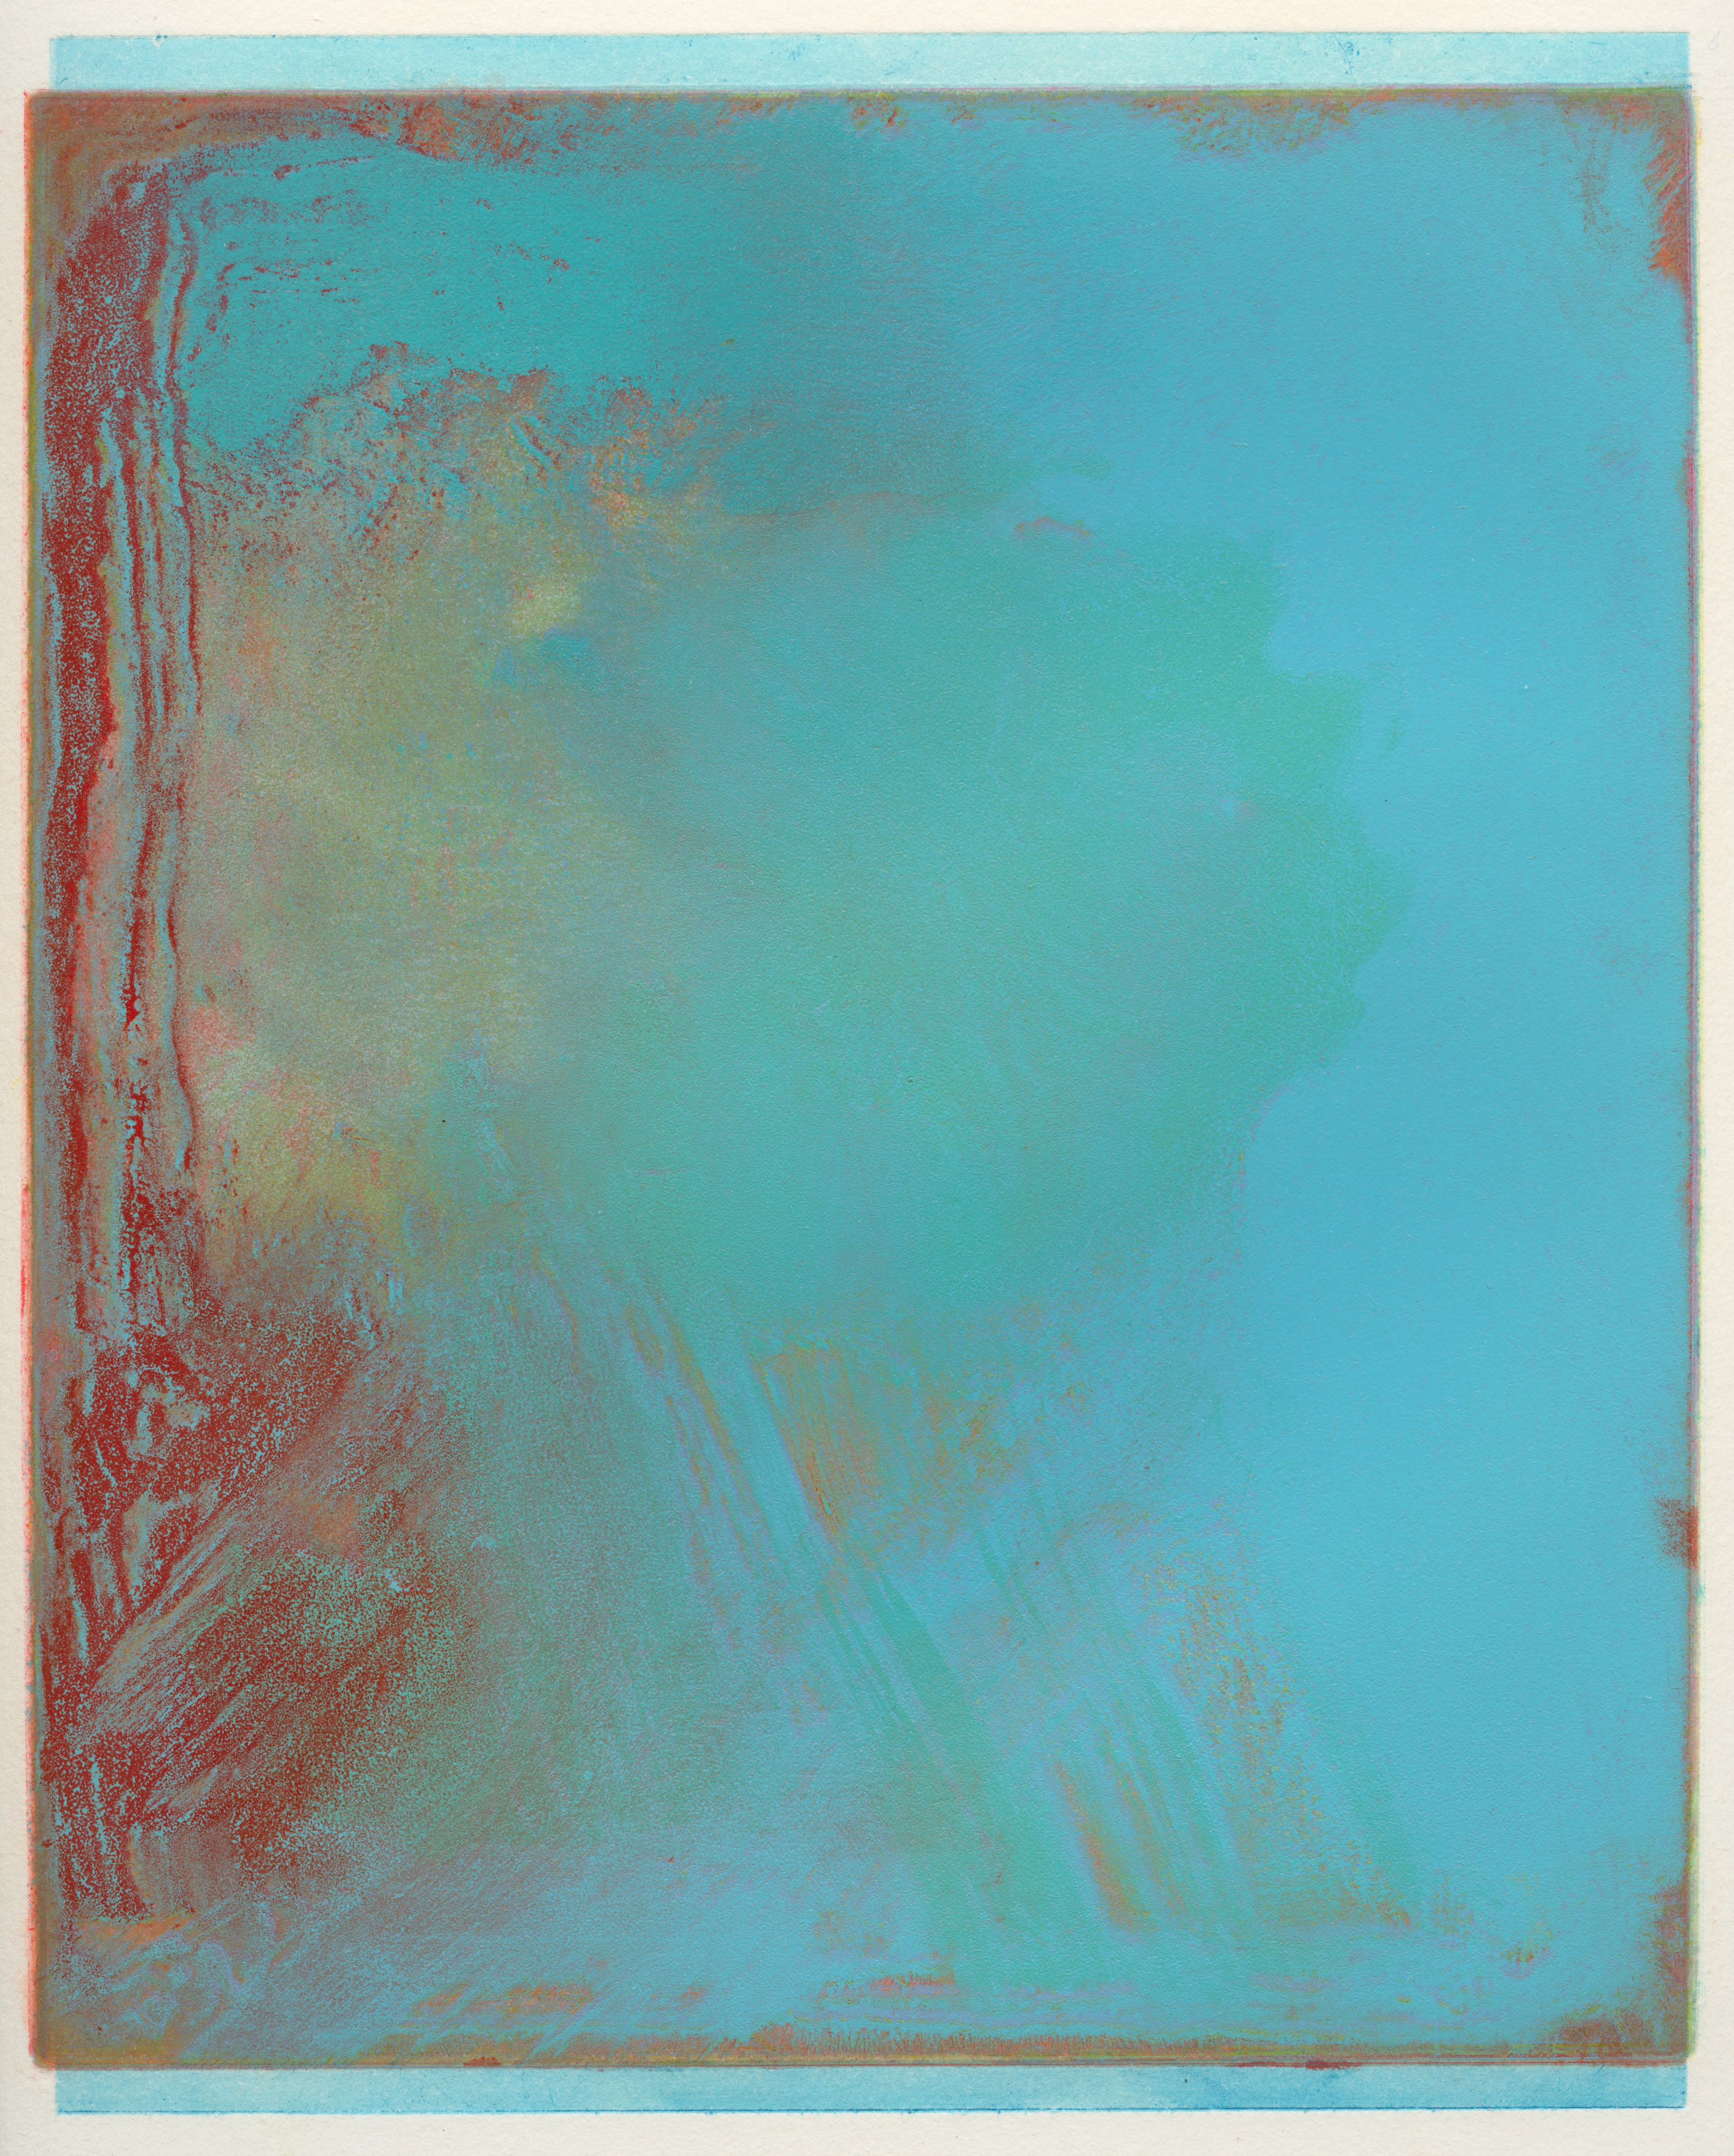 Monoprint on paper with a blurry turquoise color layered over a red and cream-colored background.